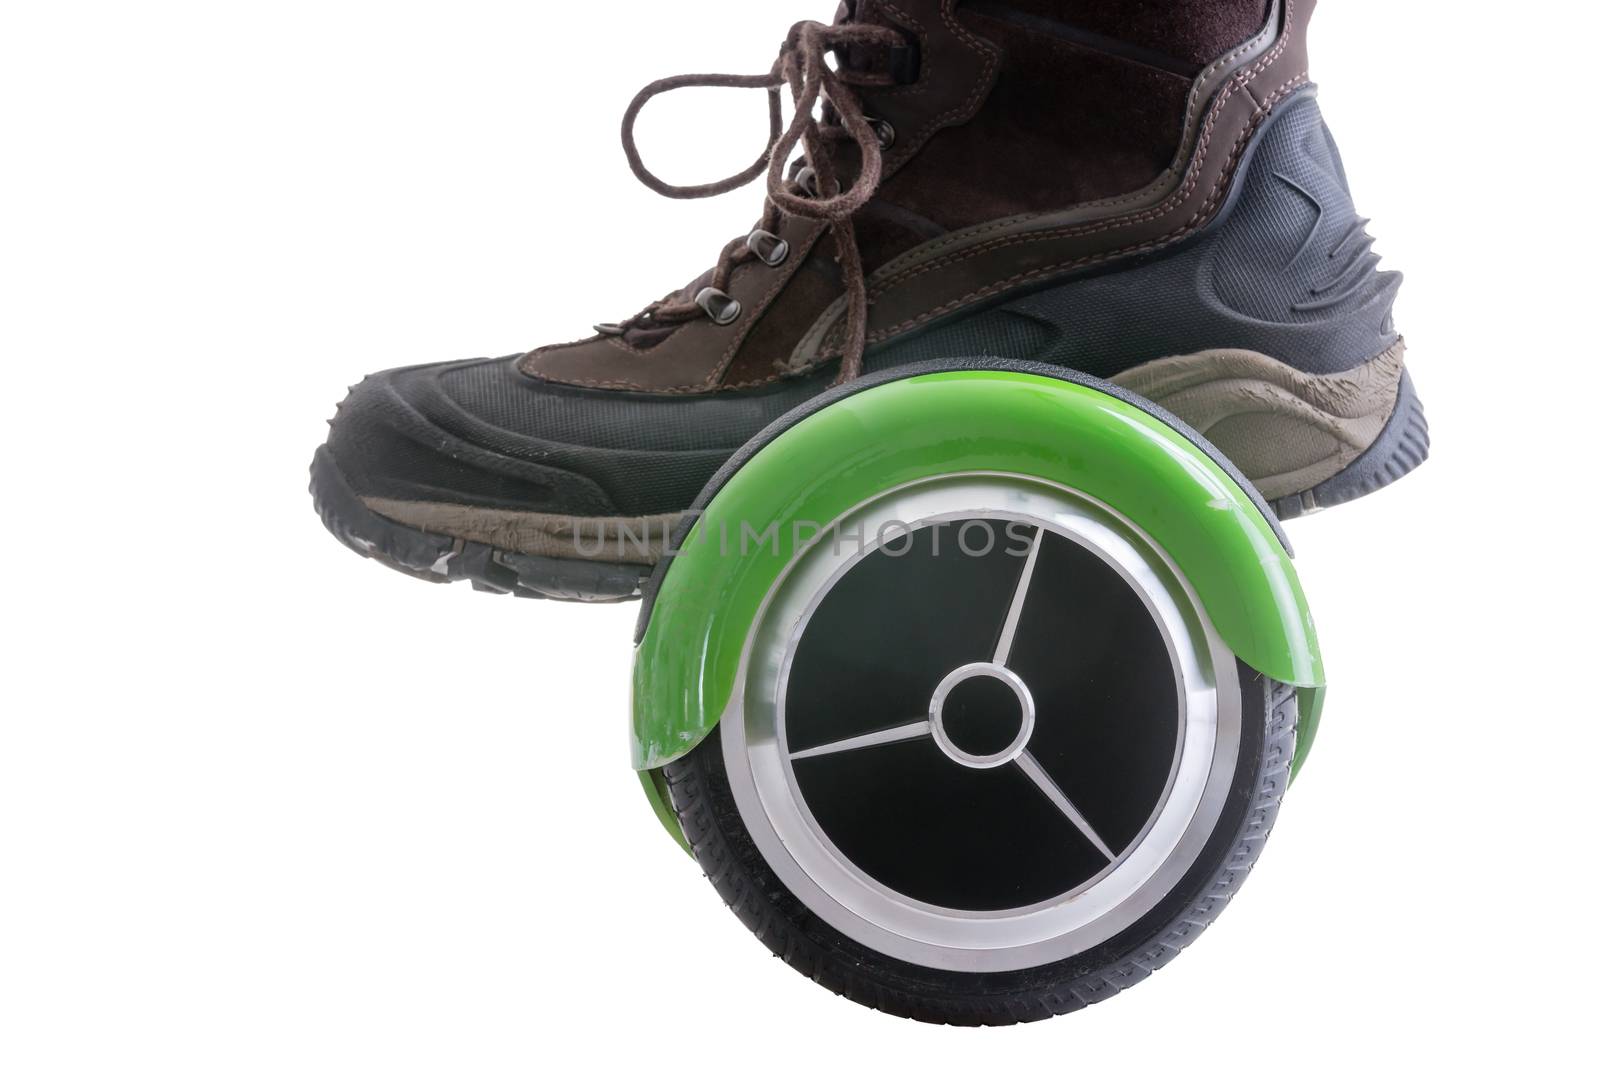 Big boot riding a modern motorised green hover board or self balancing scooter, the new trendy mode of transportation, isolated on white